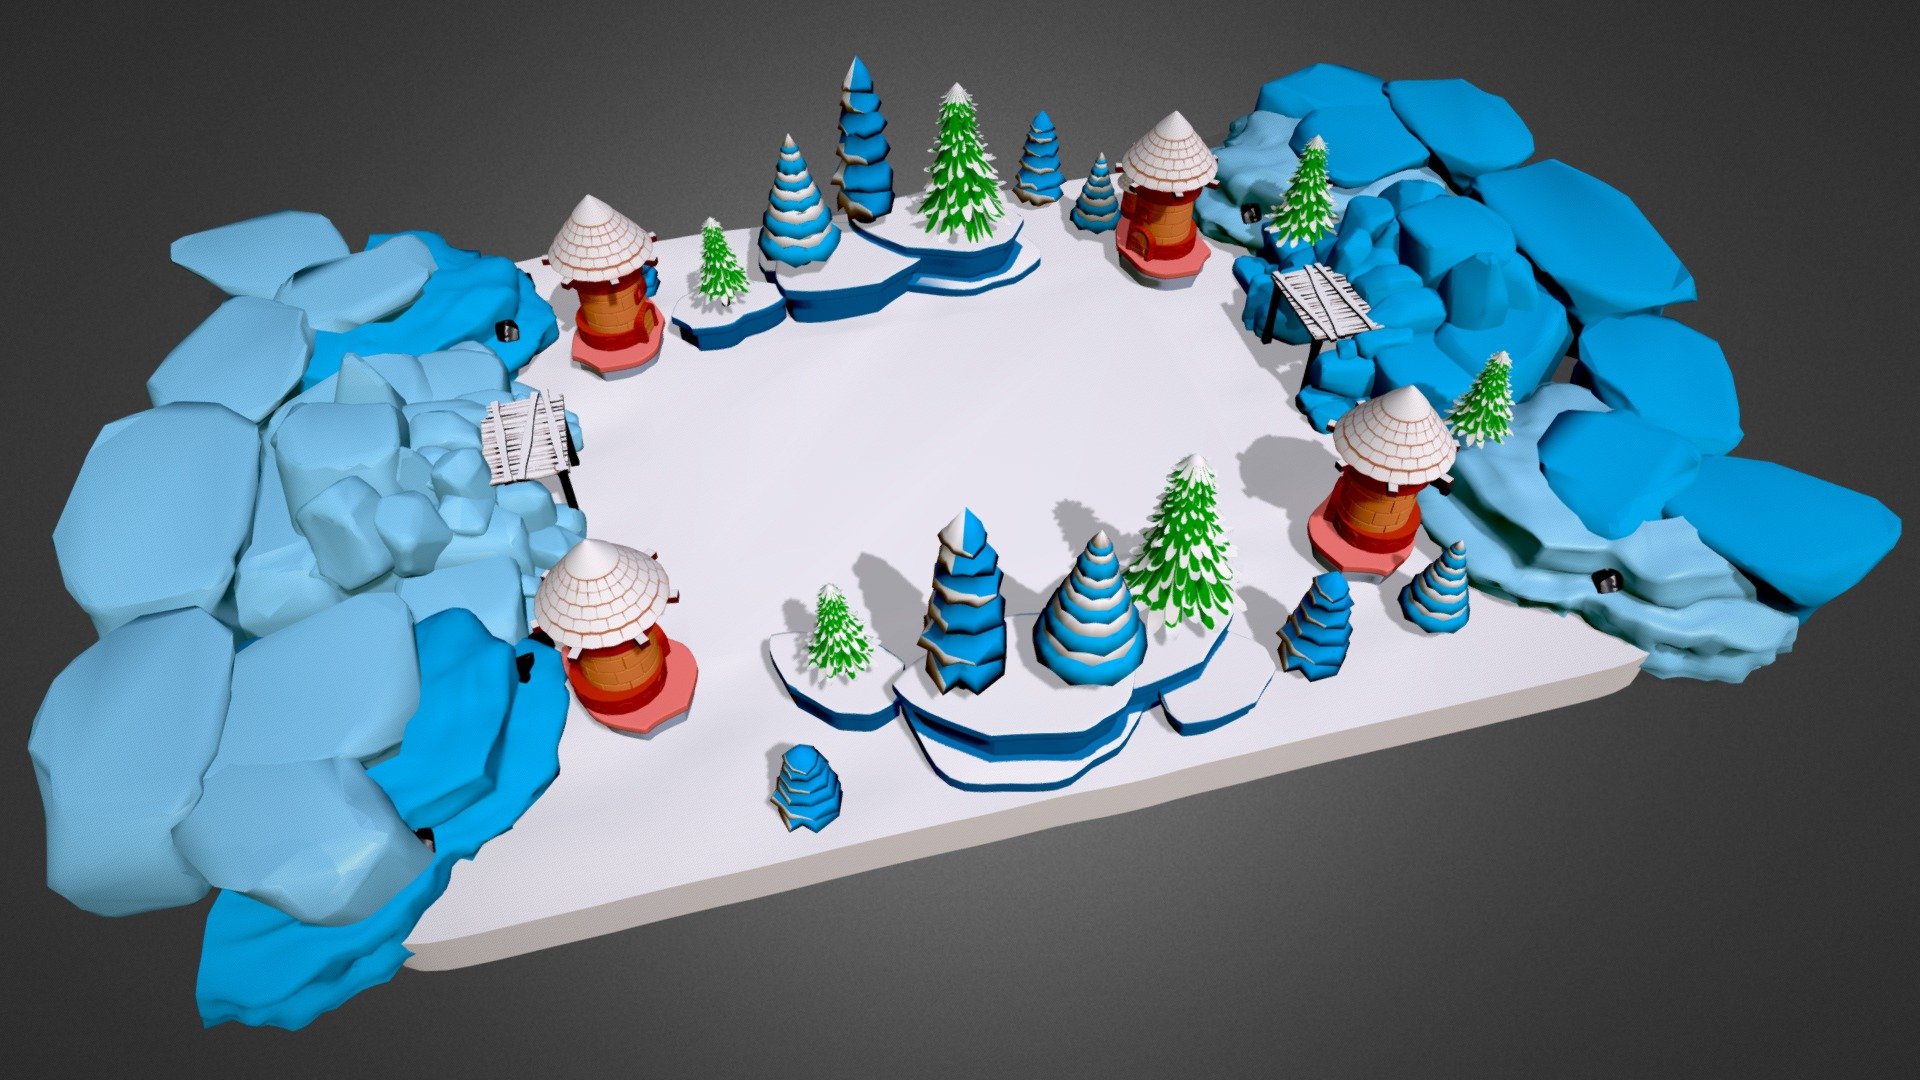 This package contains a very nice low-poly Snow Environment model.
This pack is suitable for games background environments, playgrounds, rendering, galleries, or whatever you want.
Can be used for hyper-casual 3d Games.
You can create different color combinations as per your needs by changing materials.

All the models are originally modeled in a blender. This pack included the following file formats: Obj, Glb, and Blend.
Enjoy this free low-poly snow theme. Leave valuable comments below. Thank you 3d model